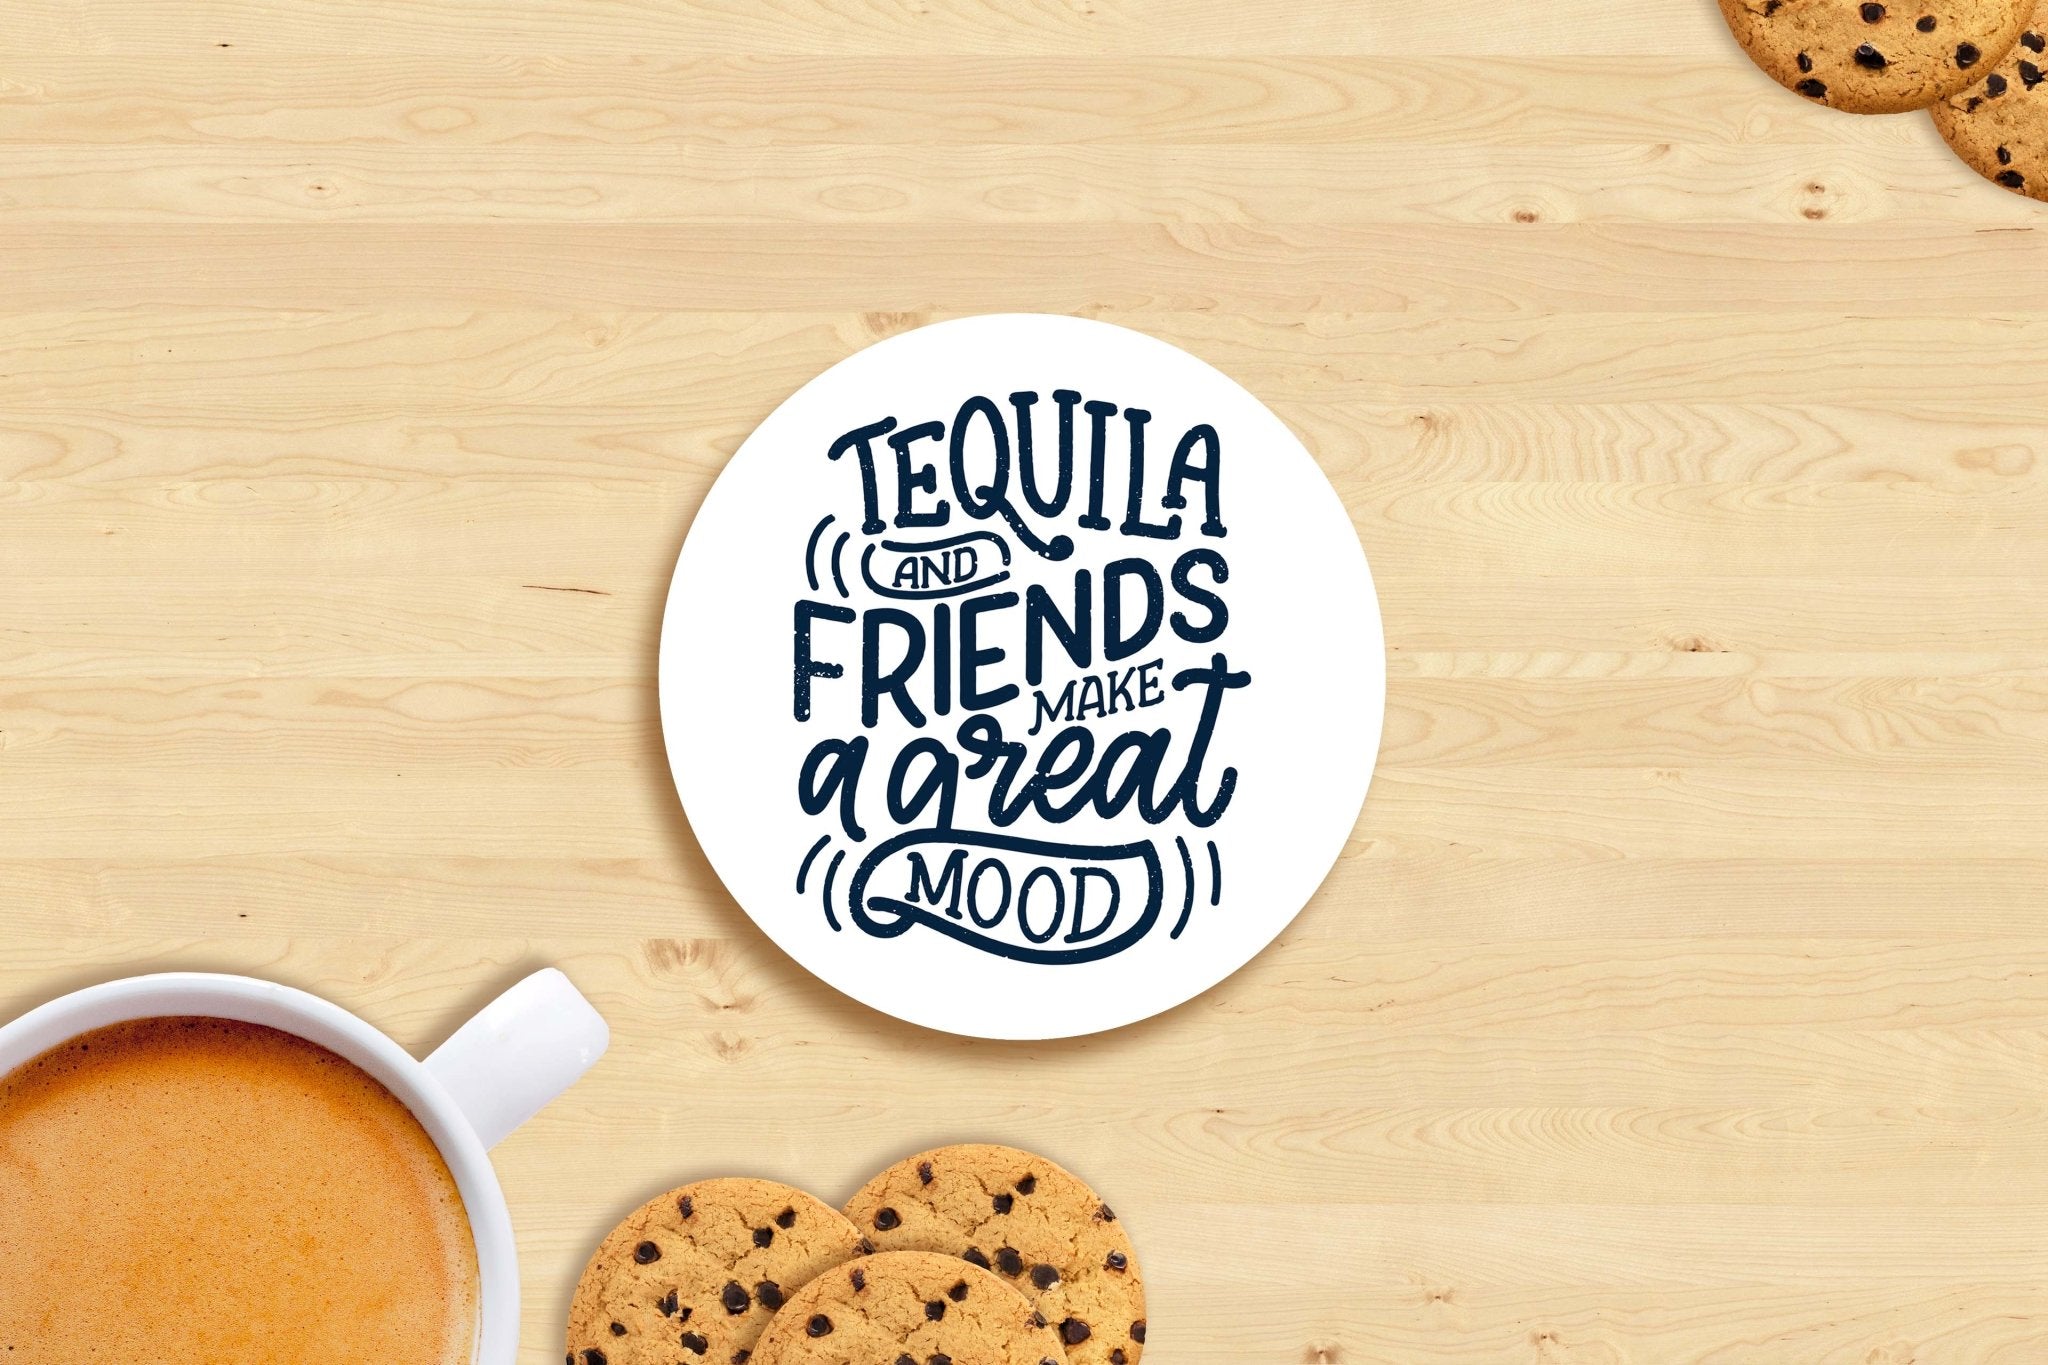 Beer O'Clock Coasters: 6-Pack for Your Relaxation